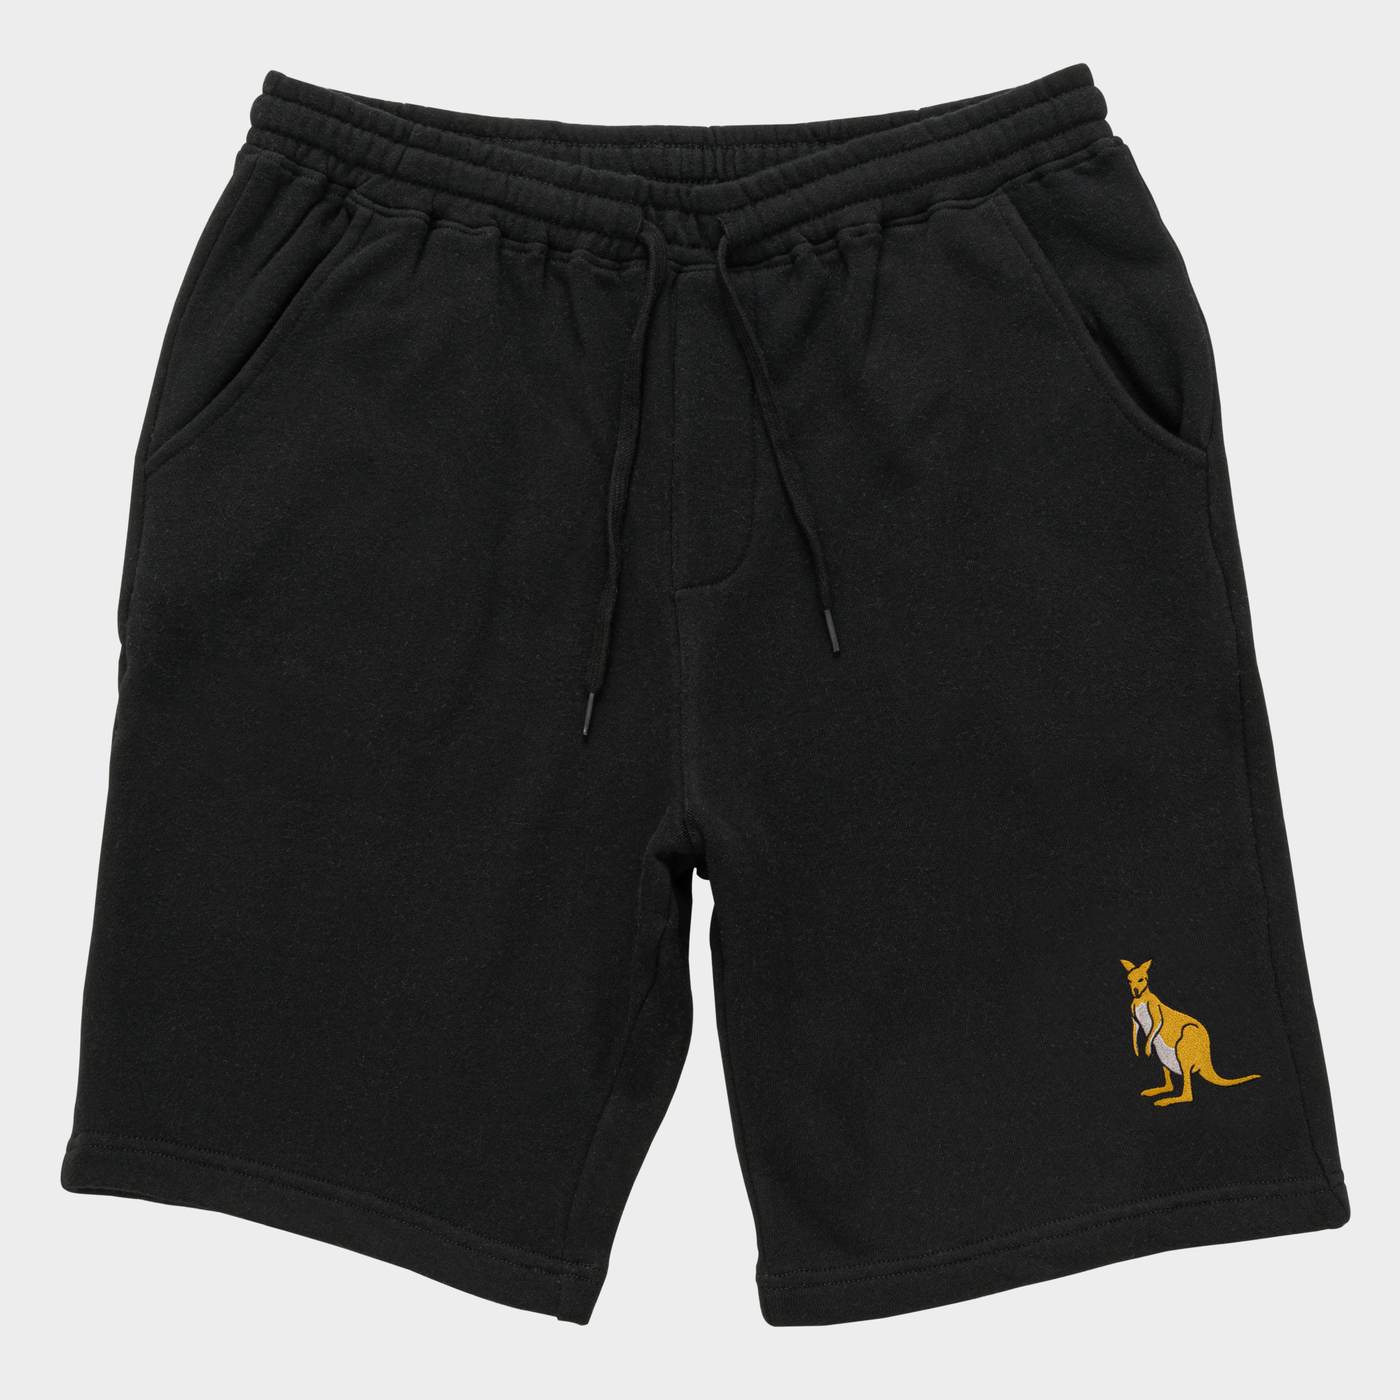 Bobby's Planet Men's Embroidered Kangaroo Shorts from Australia Down Under Animals Collection in Black Color#color_black